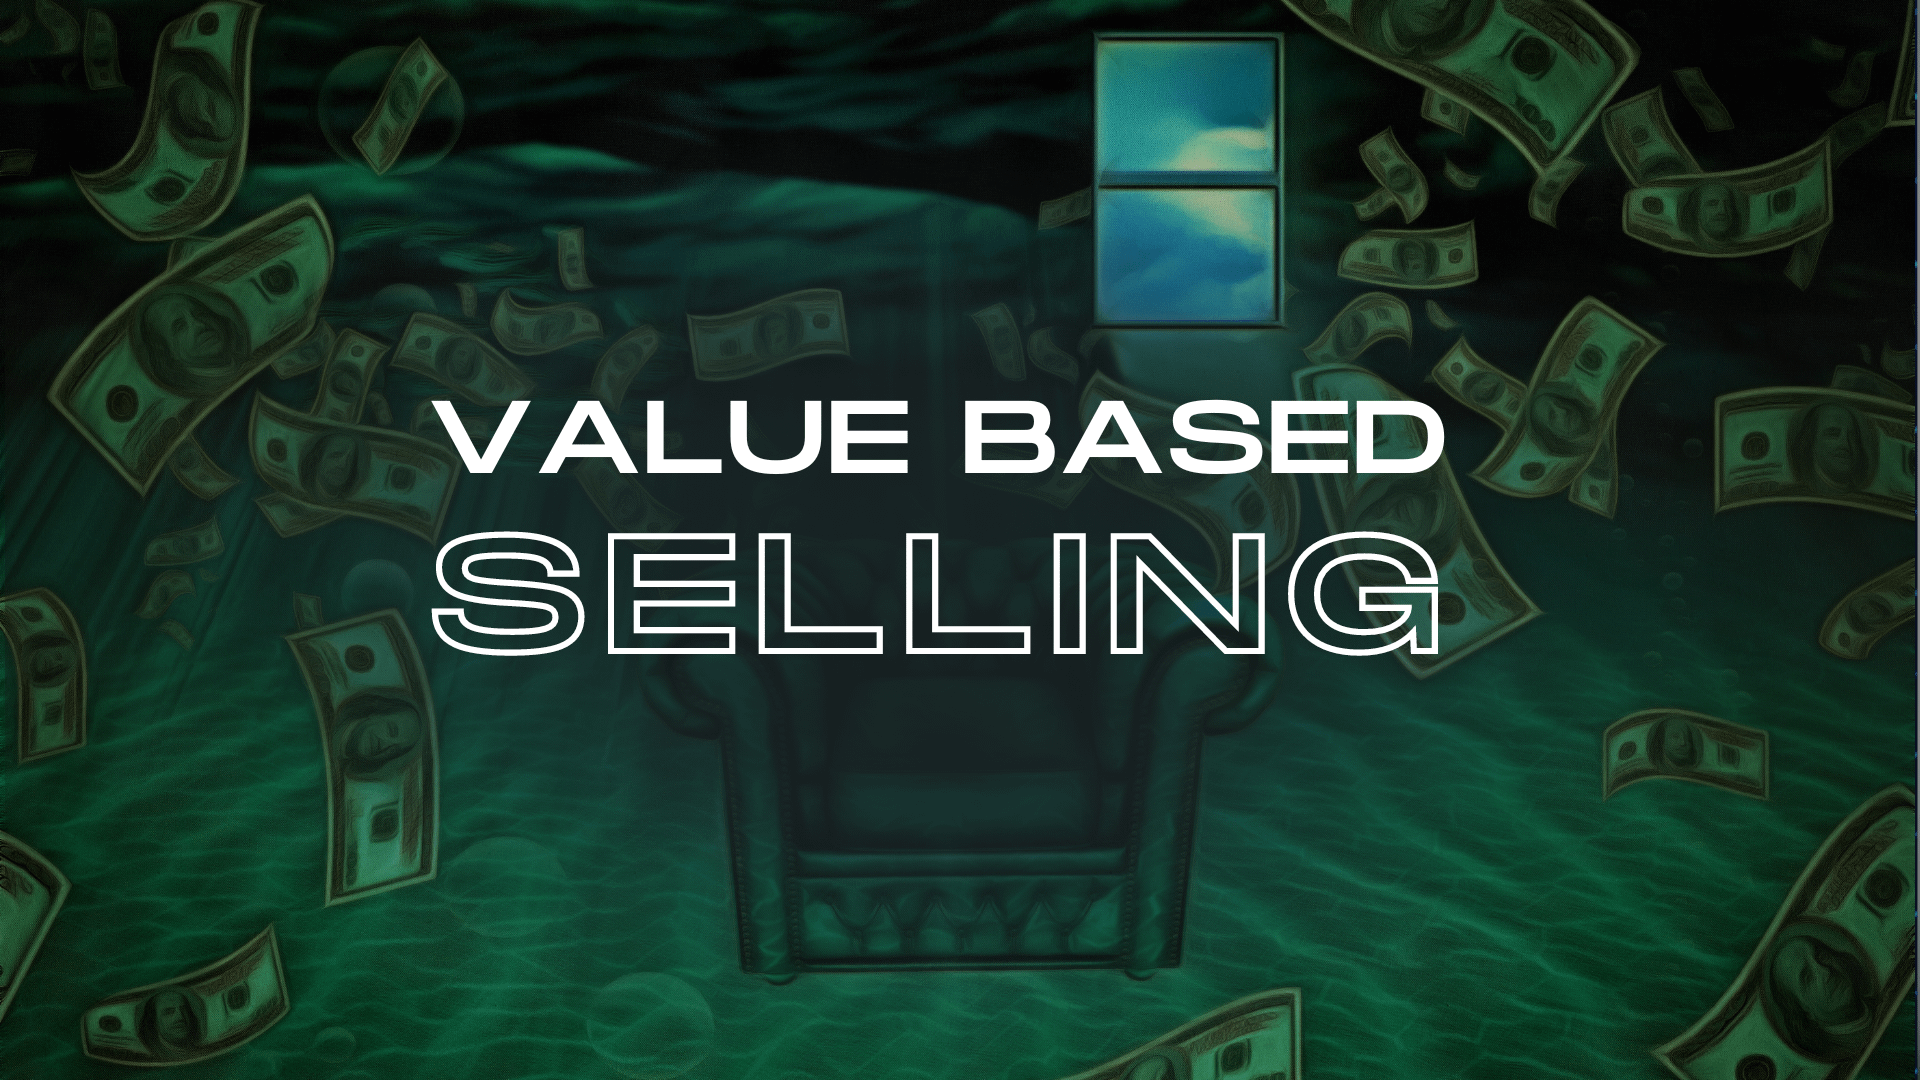 Value based selling